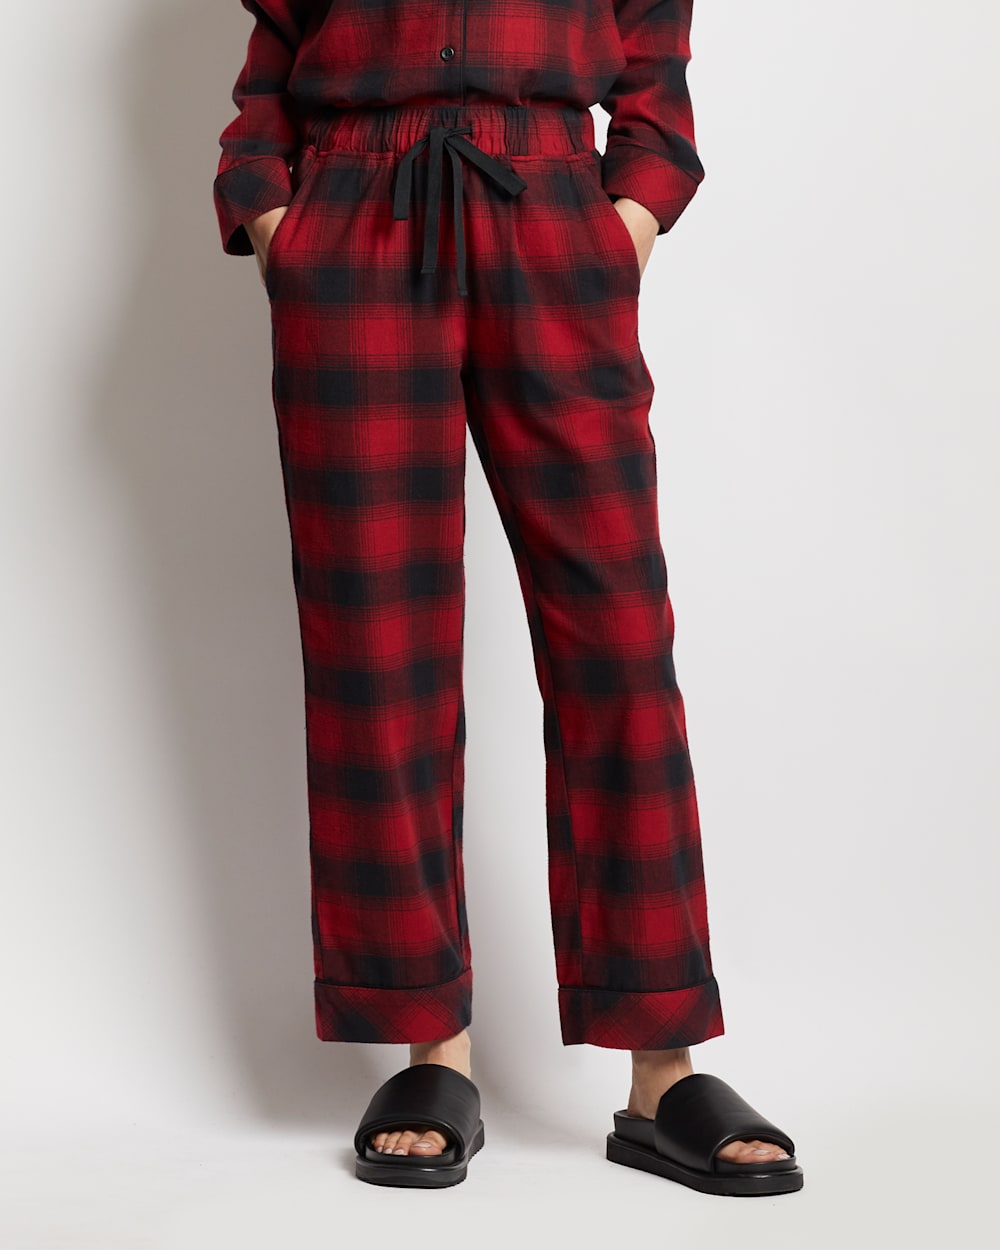 ALTERNATE VIEW OF WOMEN'S PAJAMA PANTS IN RED/BLACK OMBRE image number 3